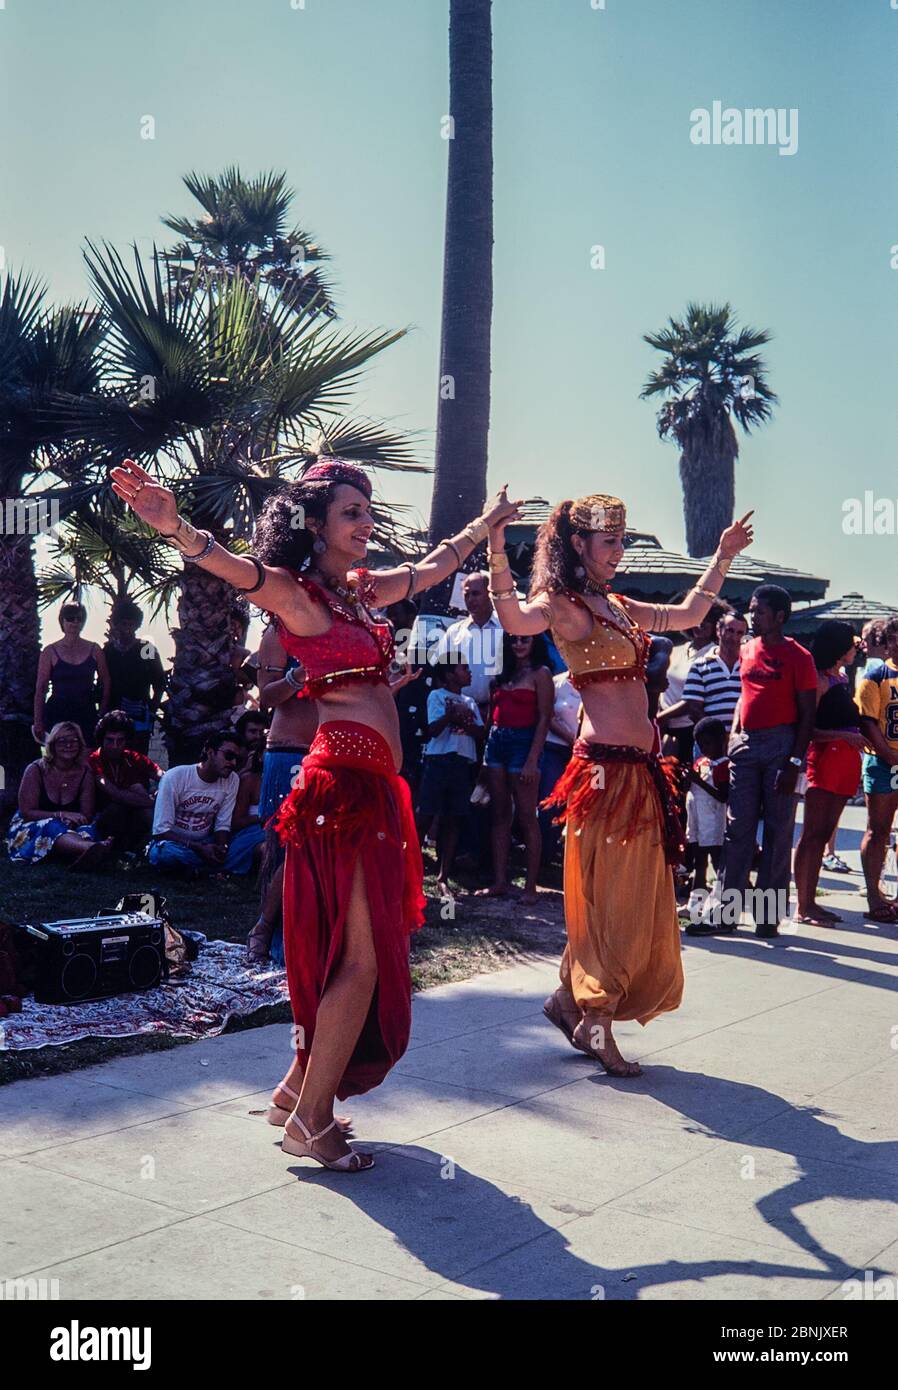 Venice, California, USA - Aug 1980: Belly dancers performing on the boardwalk at Venice Beach, Los Angeles, California.  Scanned 35mm film. Stock Photo